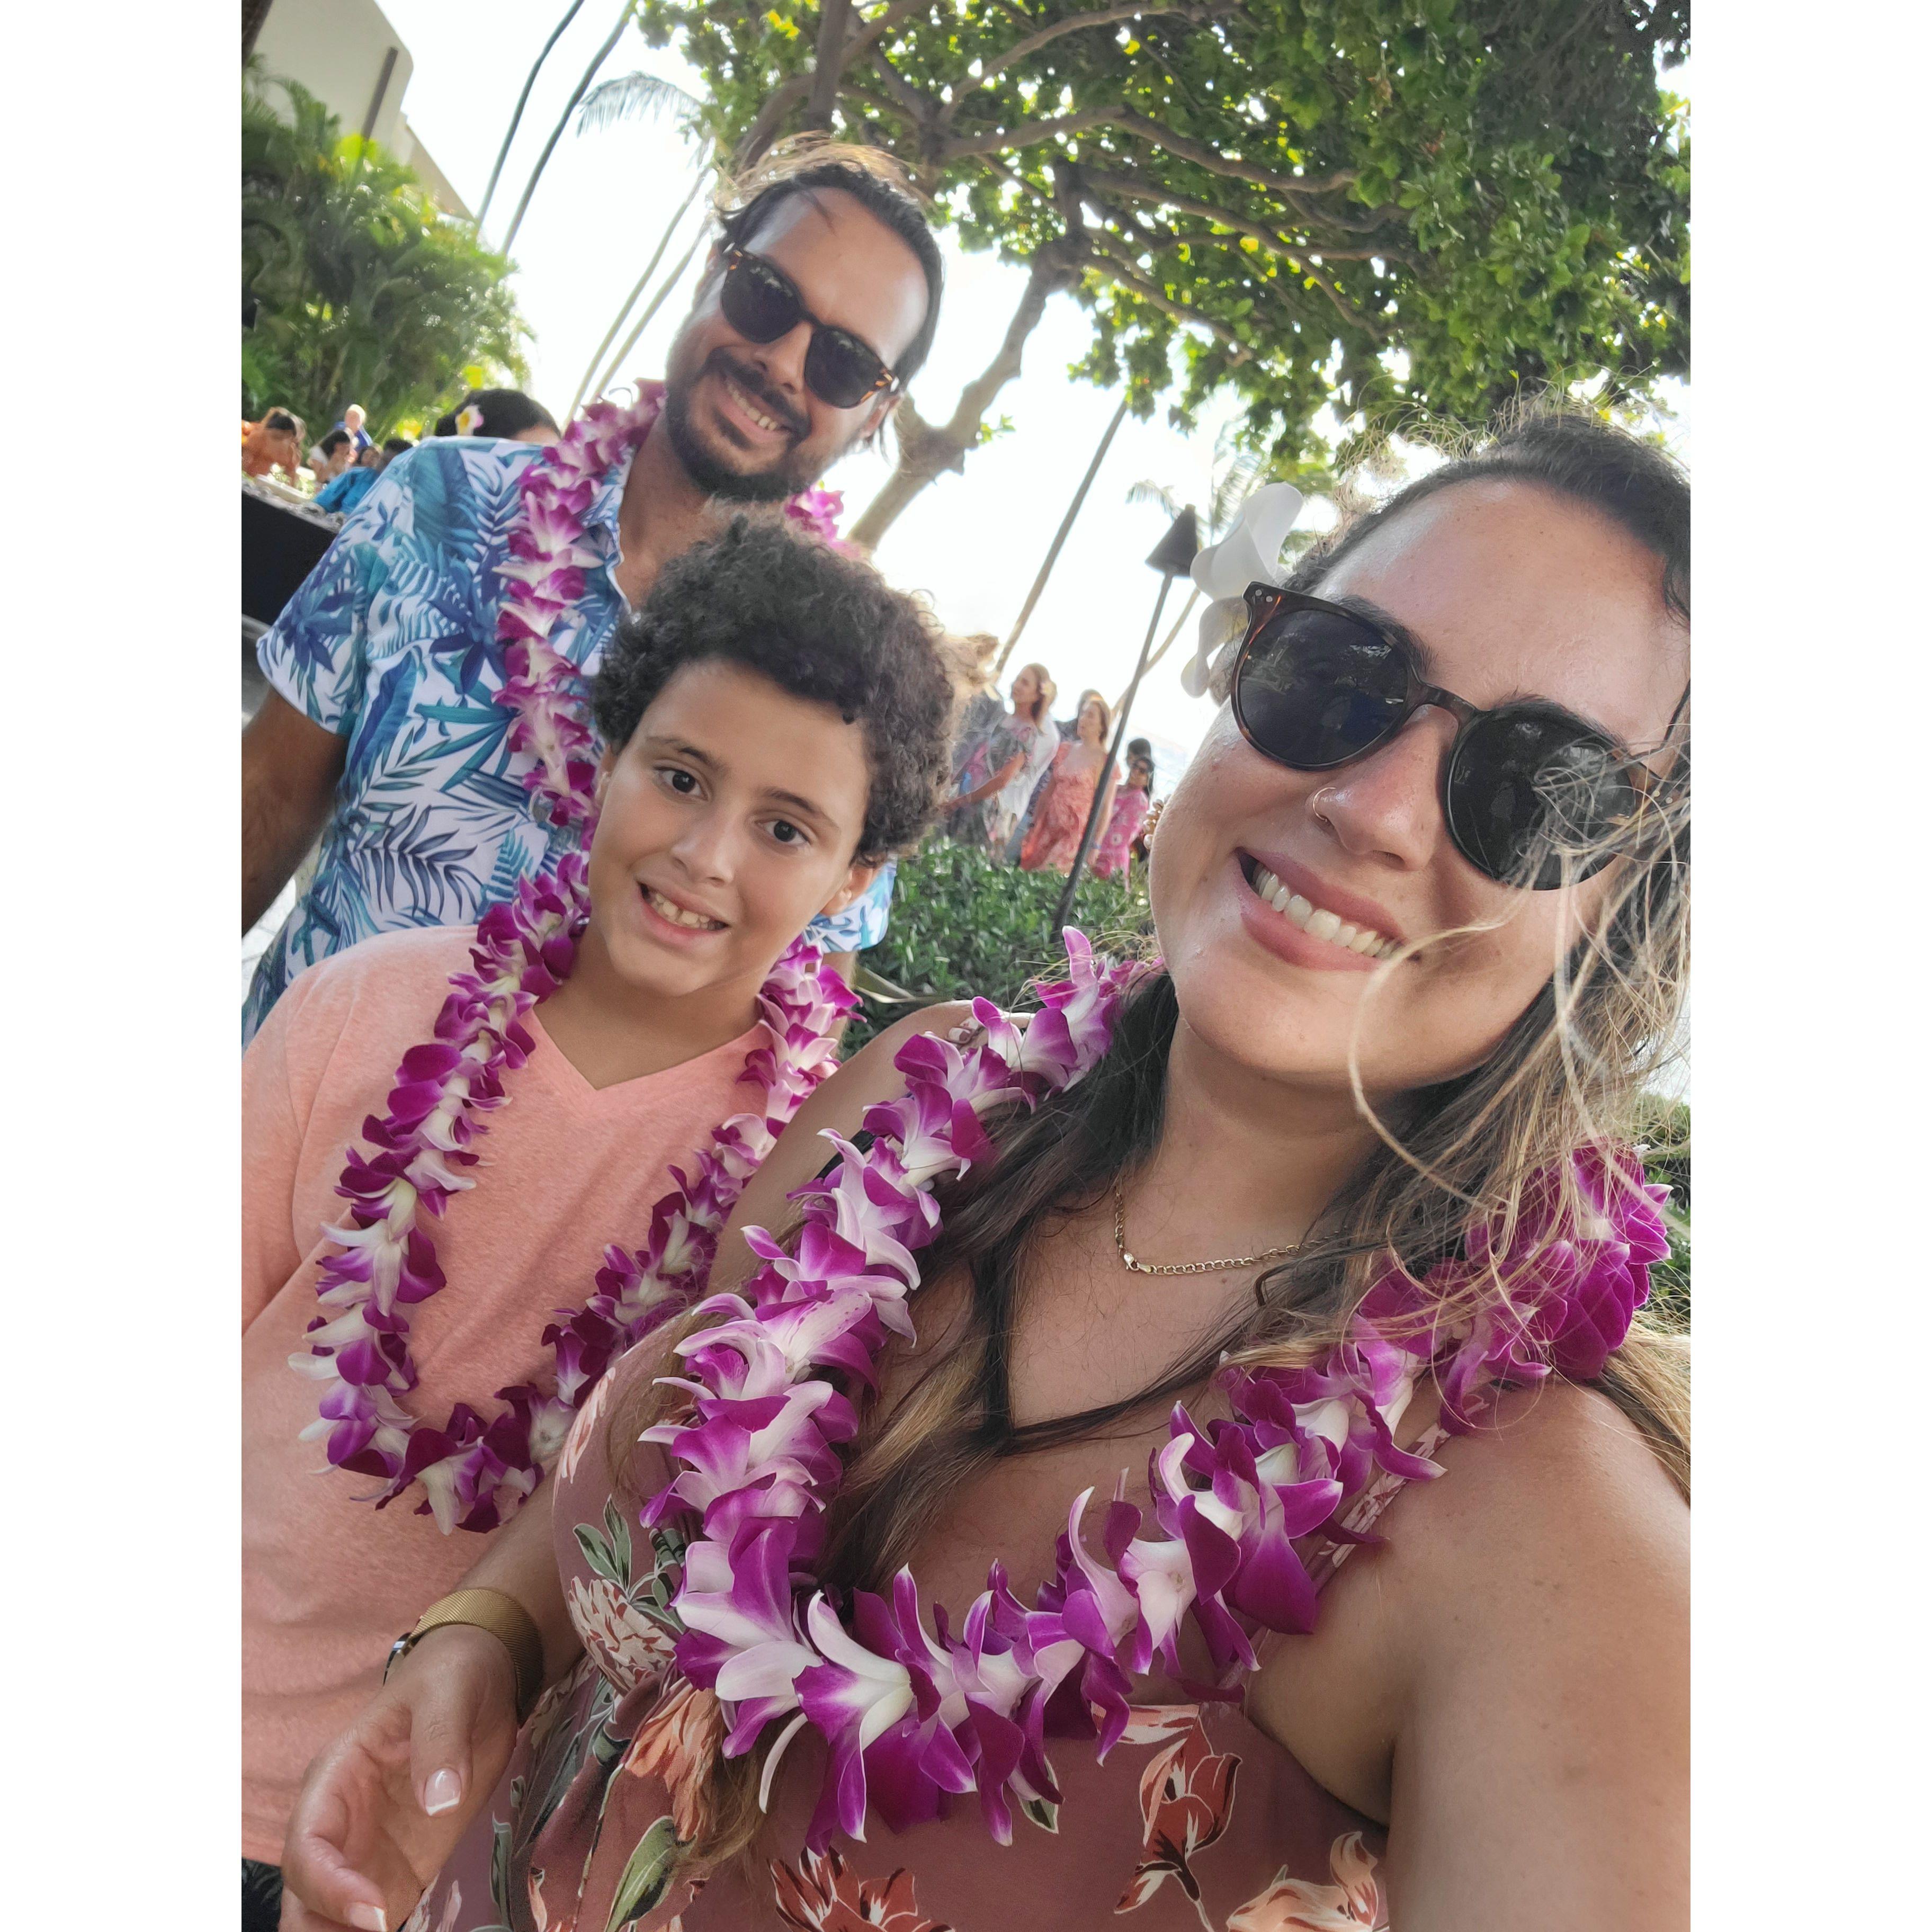 Our first Luau in Hawaii